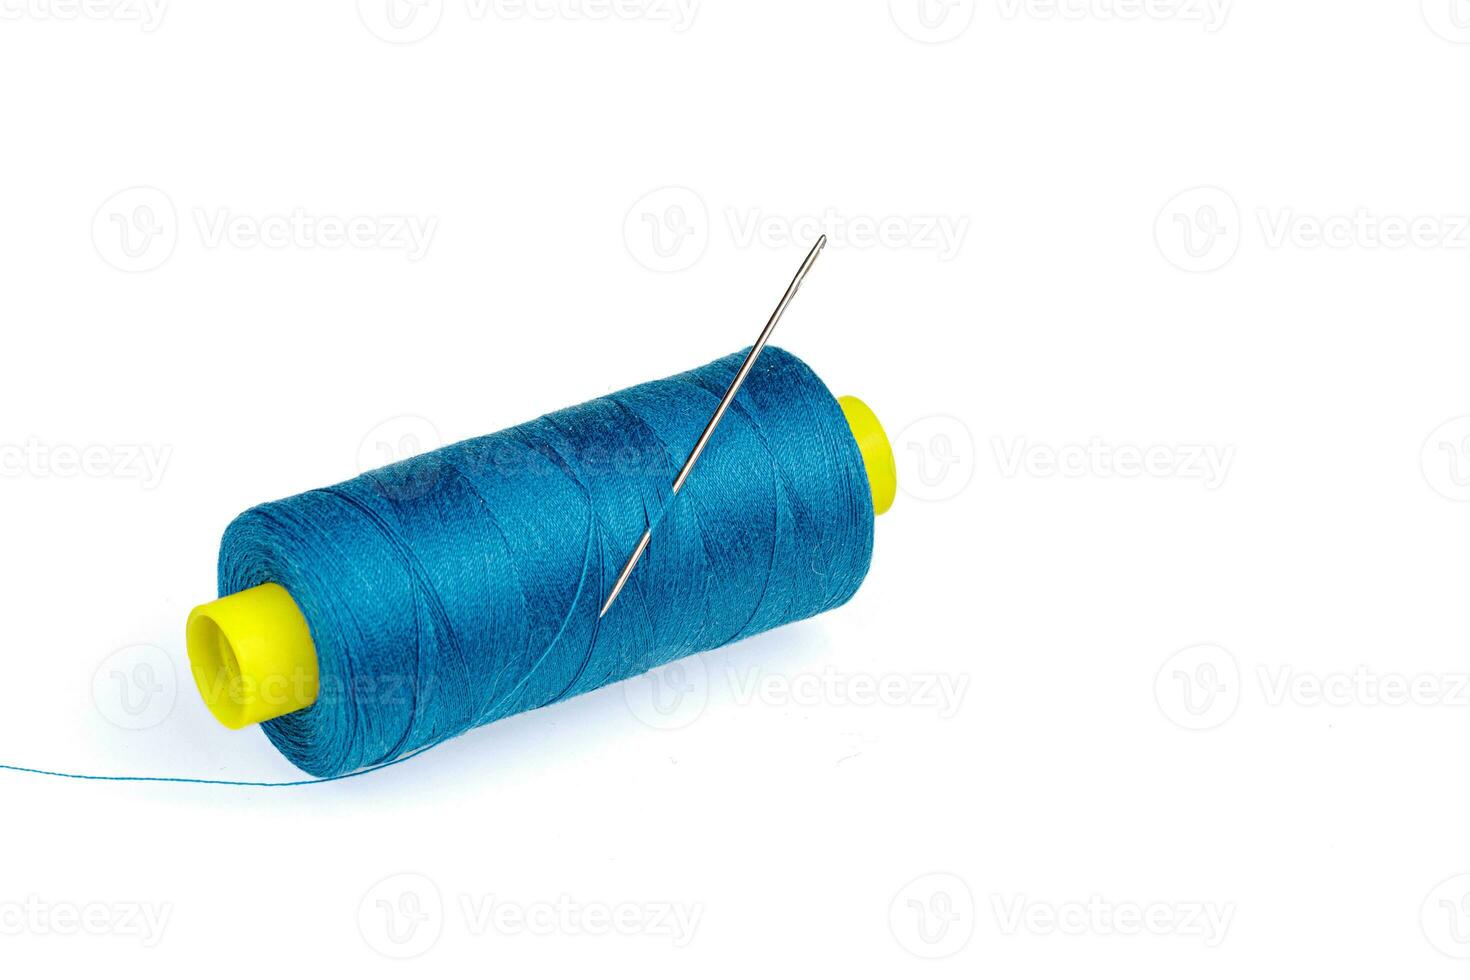 Macro skein of blue thread with a needle on a white background photo